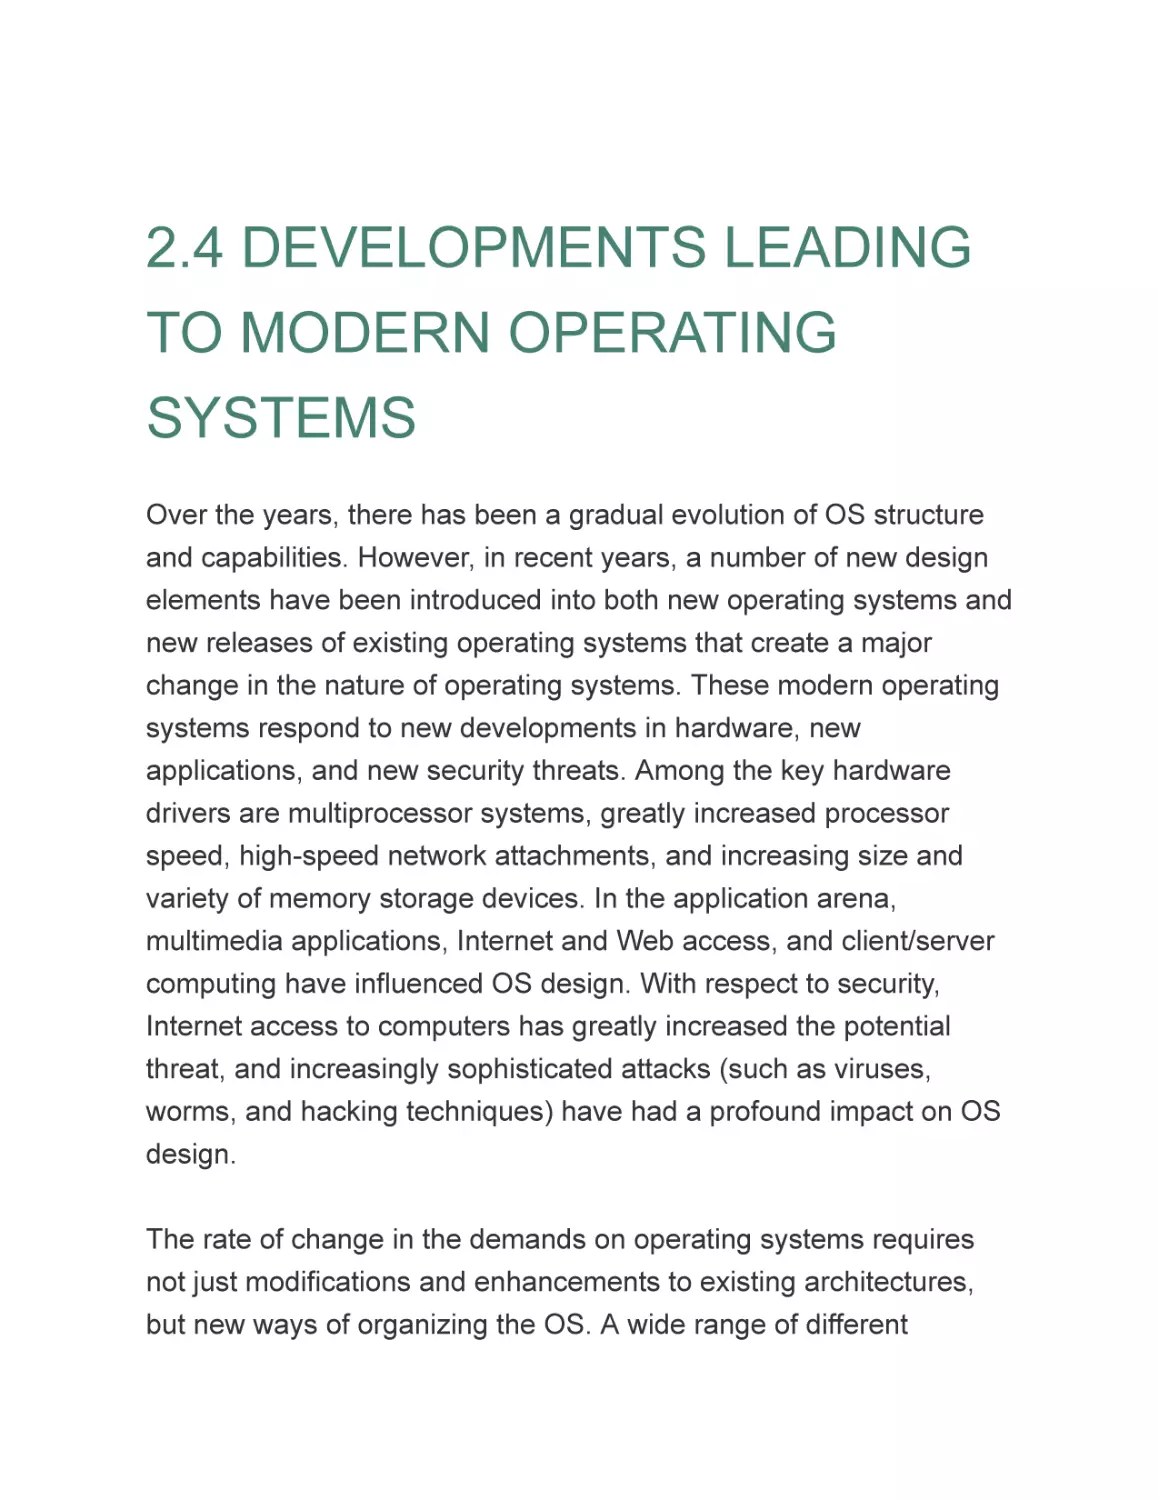 2.4 DEVELOPMENTS LEADING TO MODERN OPERATING SYSTEMS